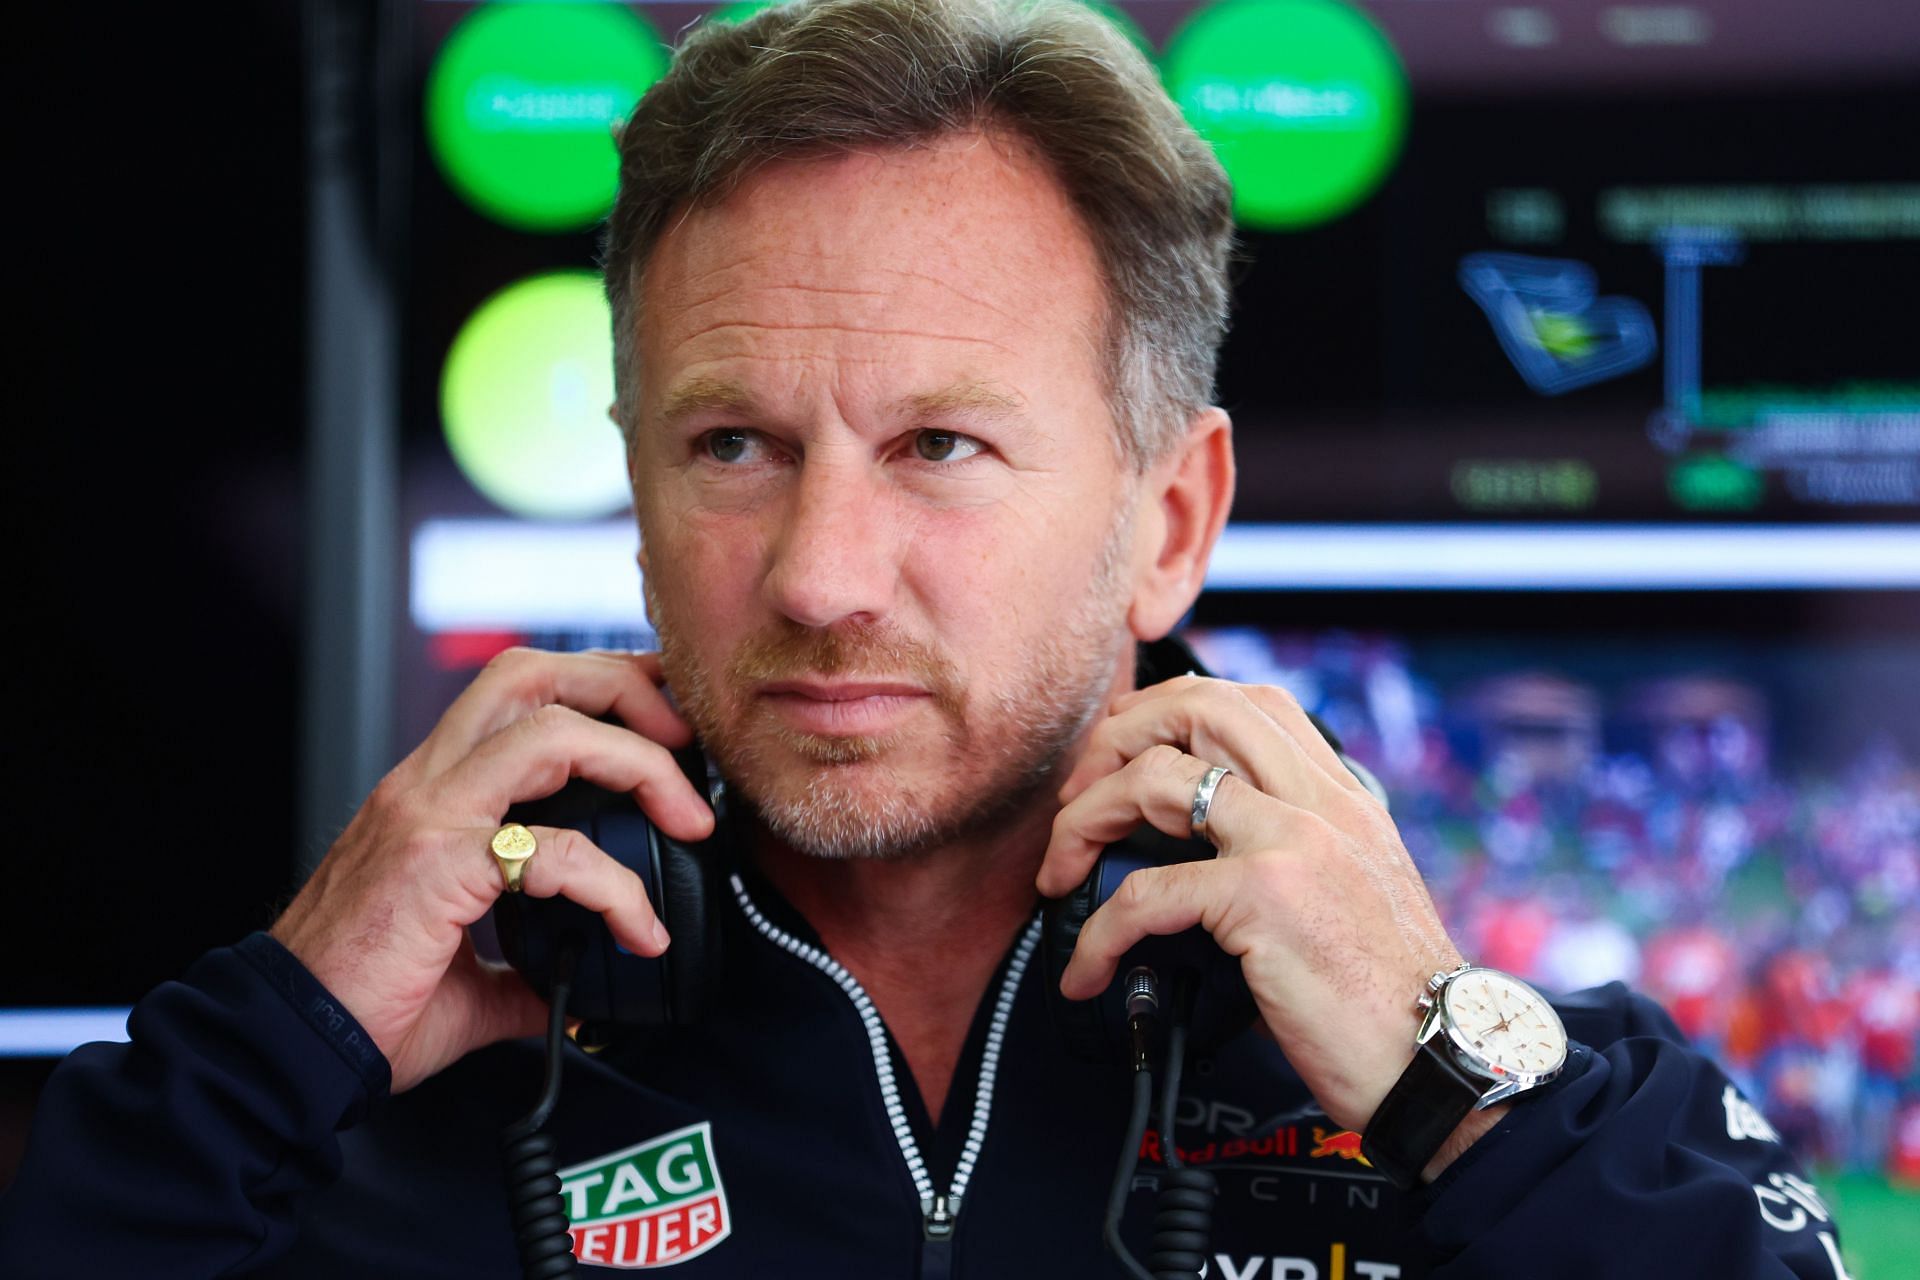 Christian Horner at the 2022 F1 Grand Prix of Austria - Practice